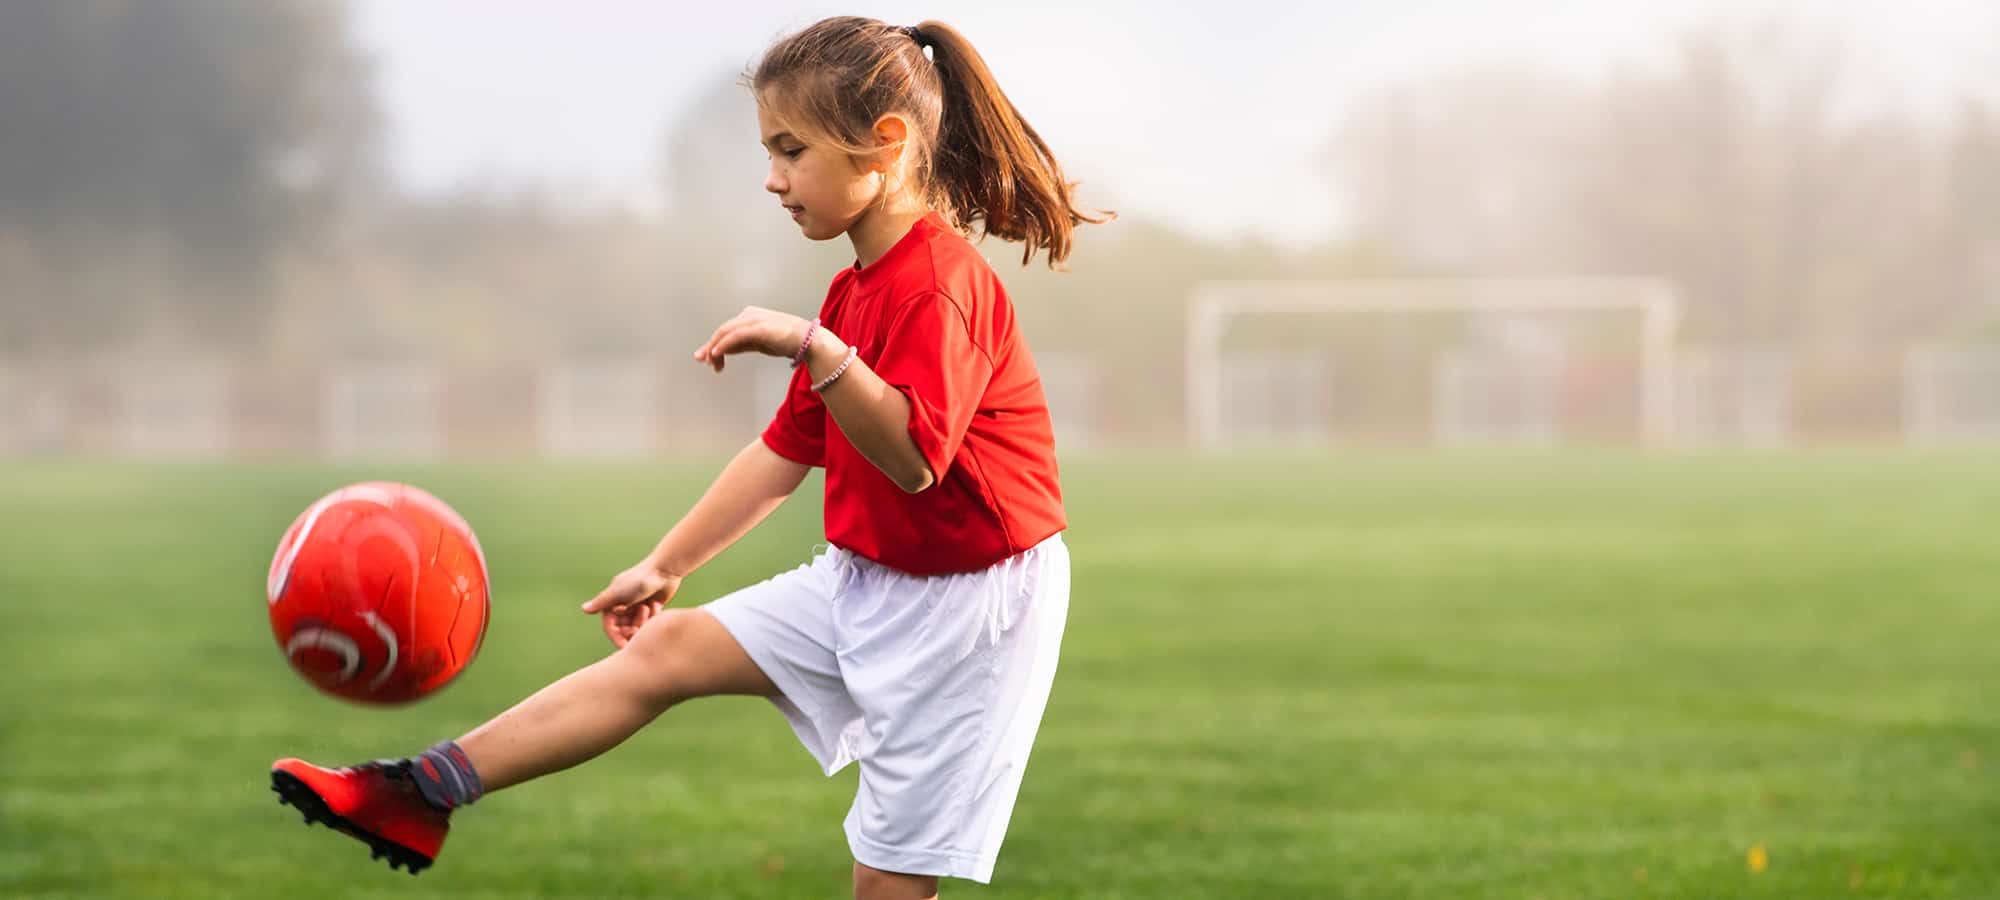 Can My Child Still Play Sport with Braces?